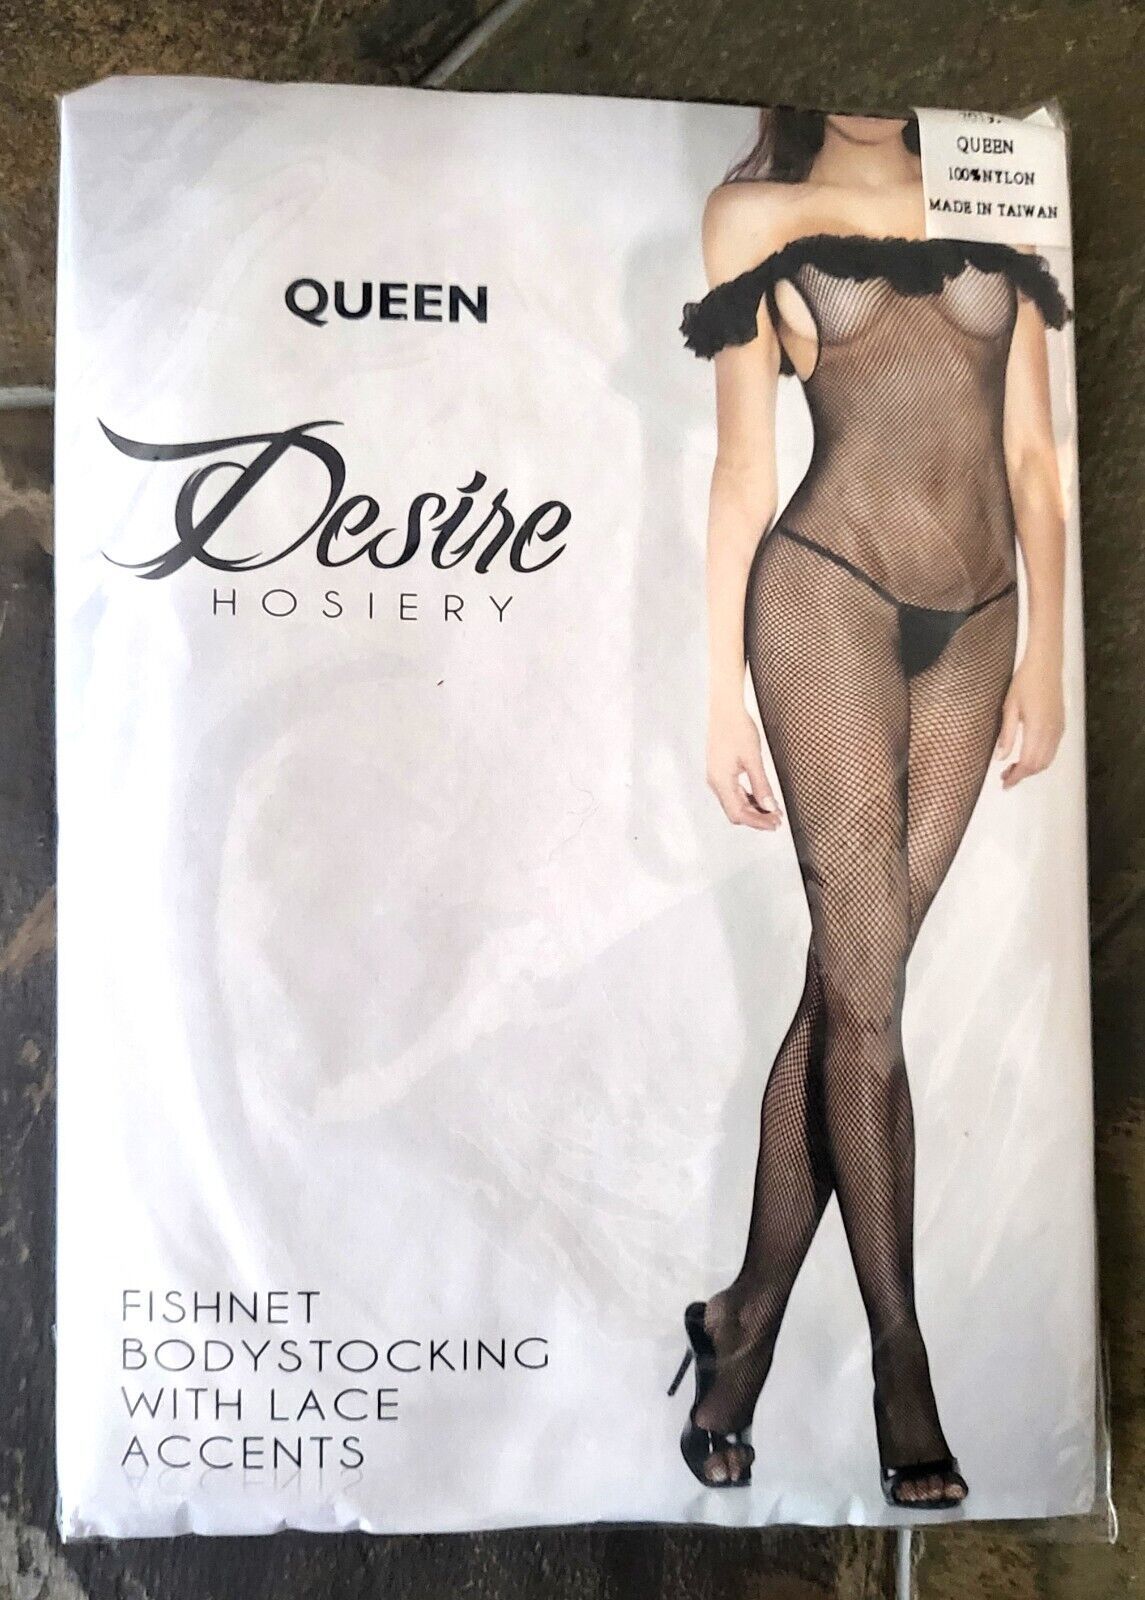 Primary image for Size Queen Fantasy Lingerie Desire Hosiery Fishnet Body Stocking w/ Open Crotch